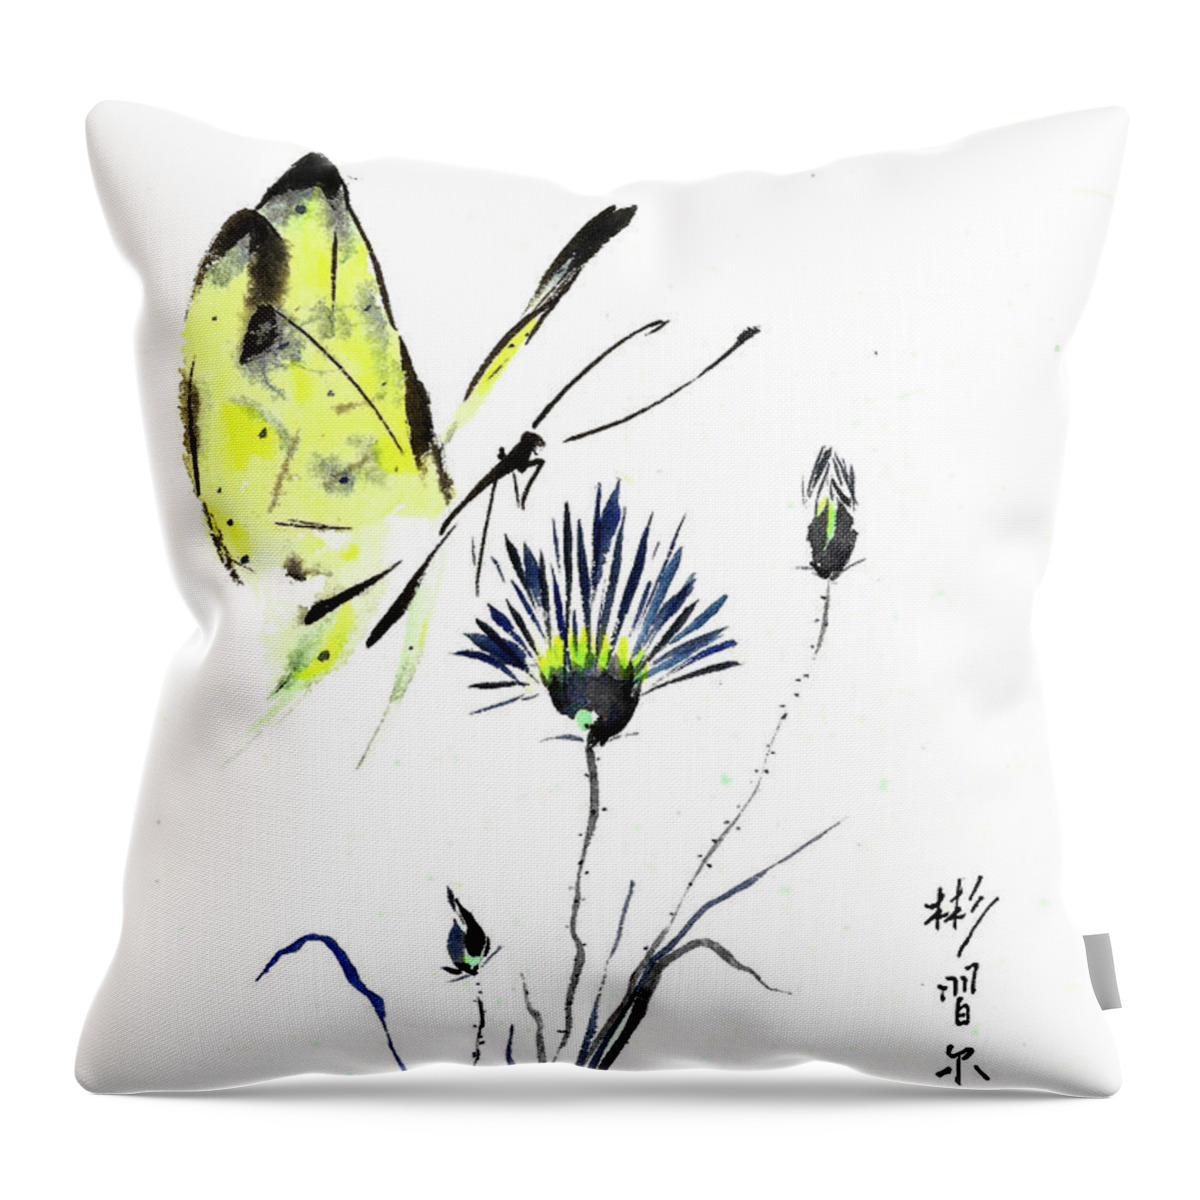 Chinese Brush Painting Throw Pillow featuring the painting Natures Passion by Bill Searle